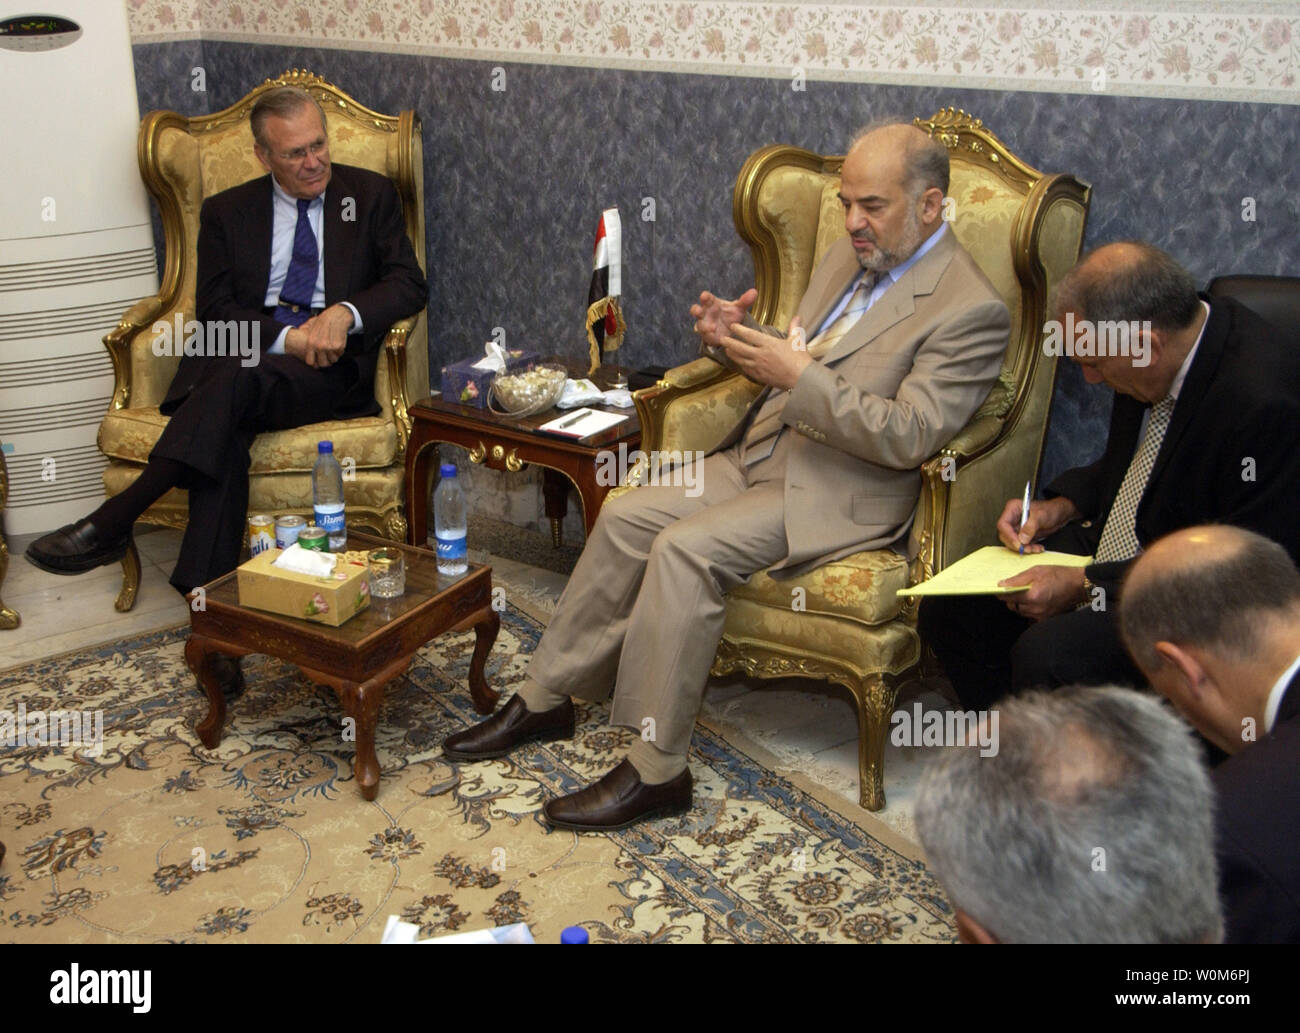 Secretary of Defense Donald H. Rumsfeld  ( left) listens to Iraqi Prime Minister Ibrahim Jafari (center) during a meeting in his residence in Baghdad, Iraq, on April 12, 2005.   Rumsfeld is in Iraq to visit with U.S. and coalition forces and to meet with the newly elected members of the Iraqi government.   (UPI Photo/ Cherie A. Thurlby/Air Force) Stock Photo